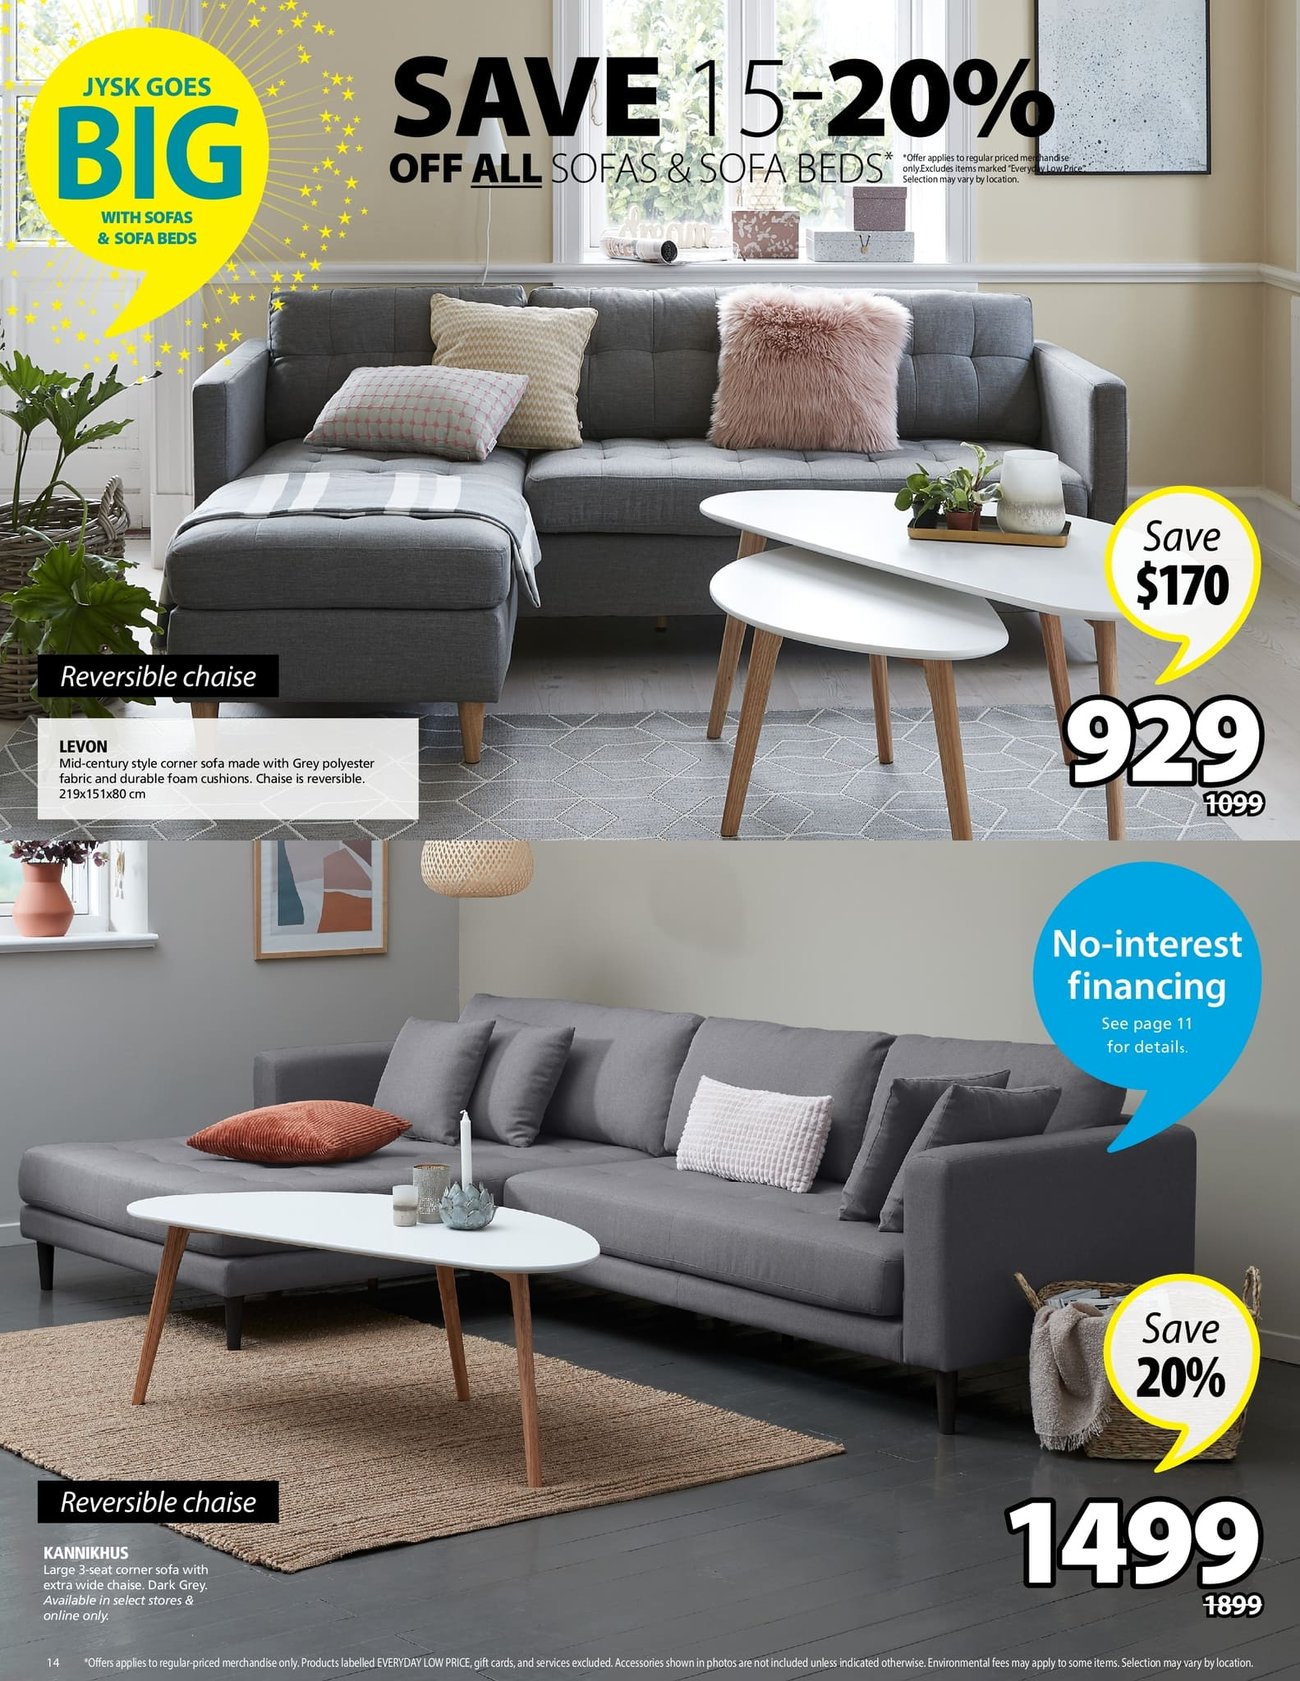 Jysk - Weekly Flyer Specials - Page 14